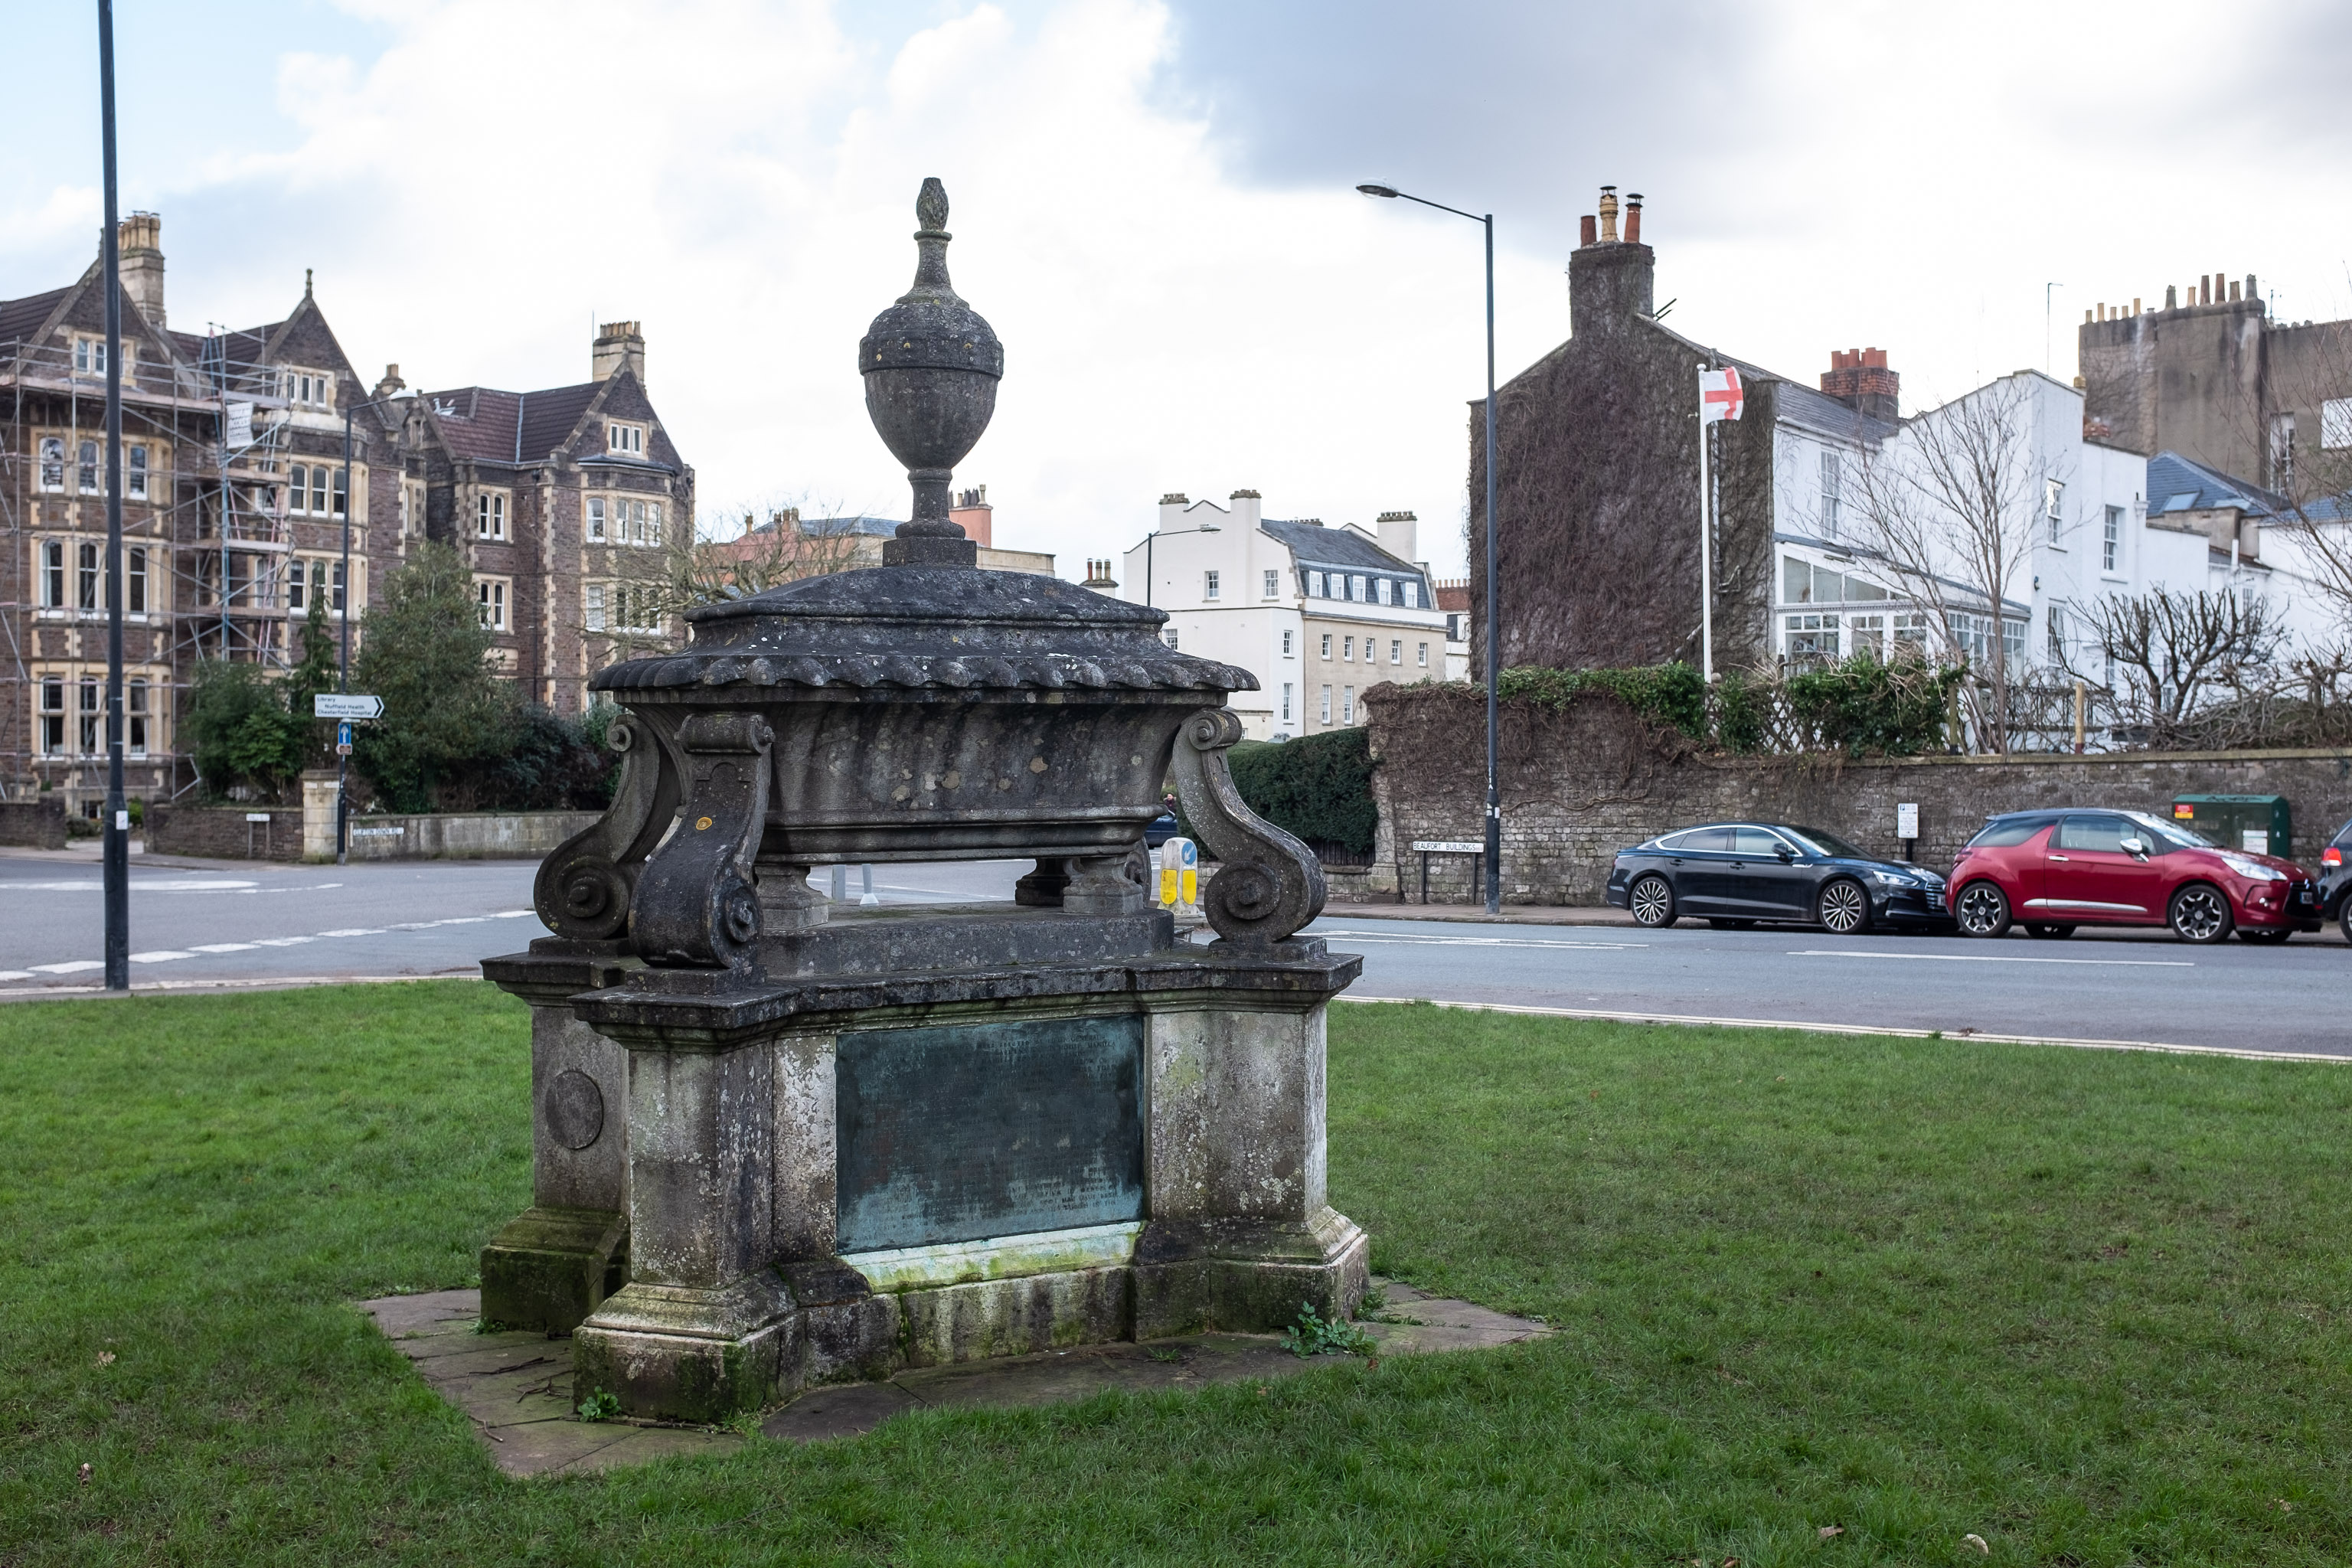 79th Regiment Manilla Monument
This sarcophagus surmounted by an urn is a 1767 memorial to the dead of the Seven Years War.

Leading off the far side of the roundabout in the bac...